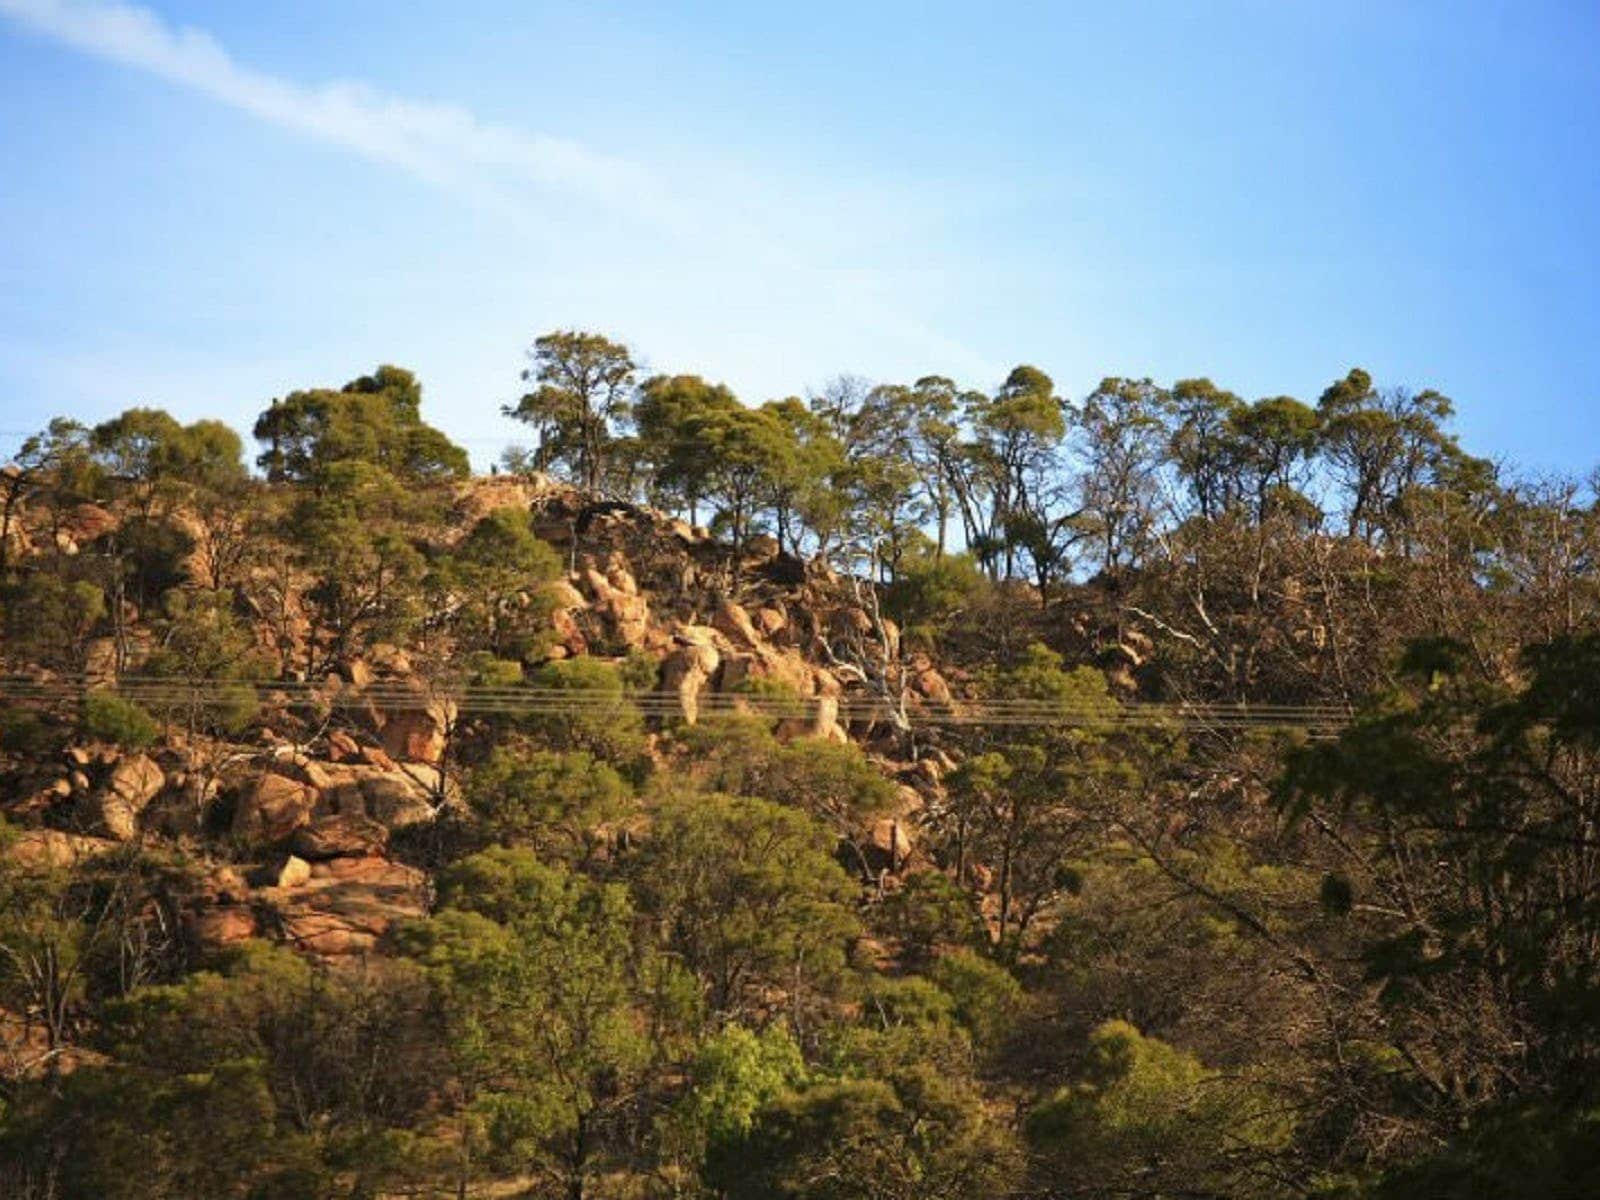 rocky hill with trees scattered over ridge, blue sky